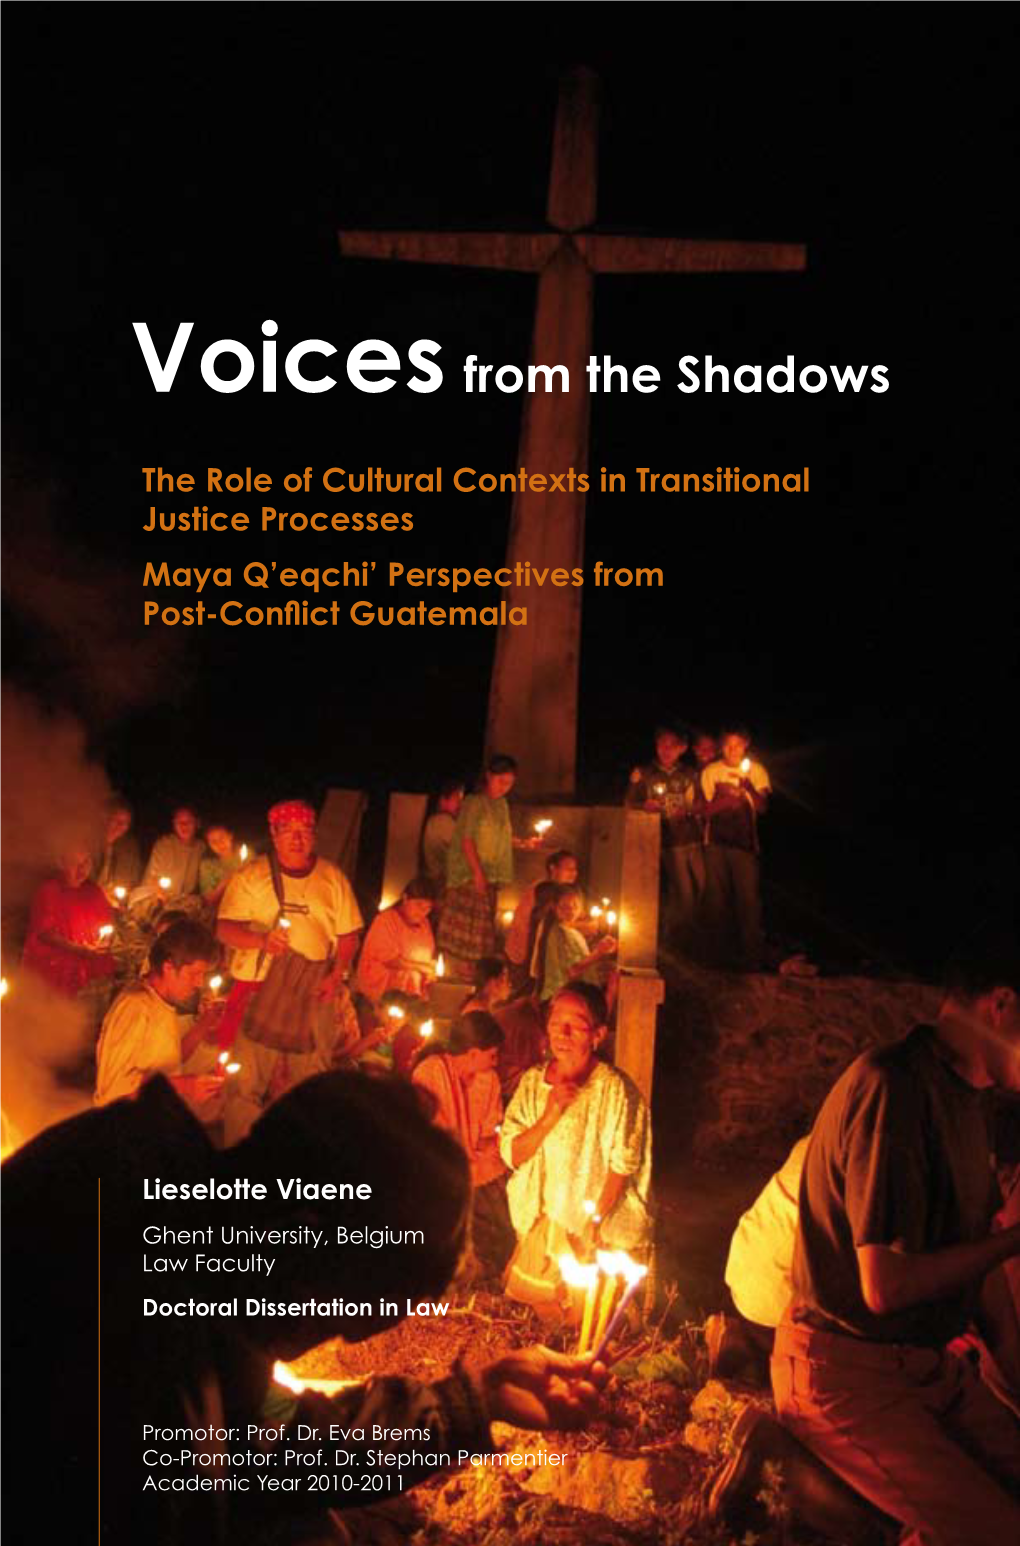 The Role of Cultural Contexts in Transitional Justice Processes Maya Q'eqchi' Perspectives from Post-Conflict Guatemala